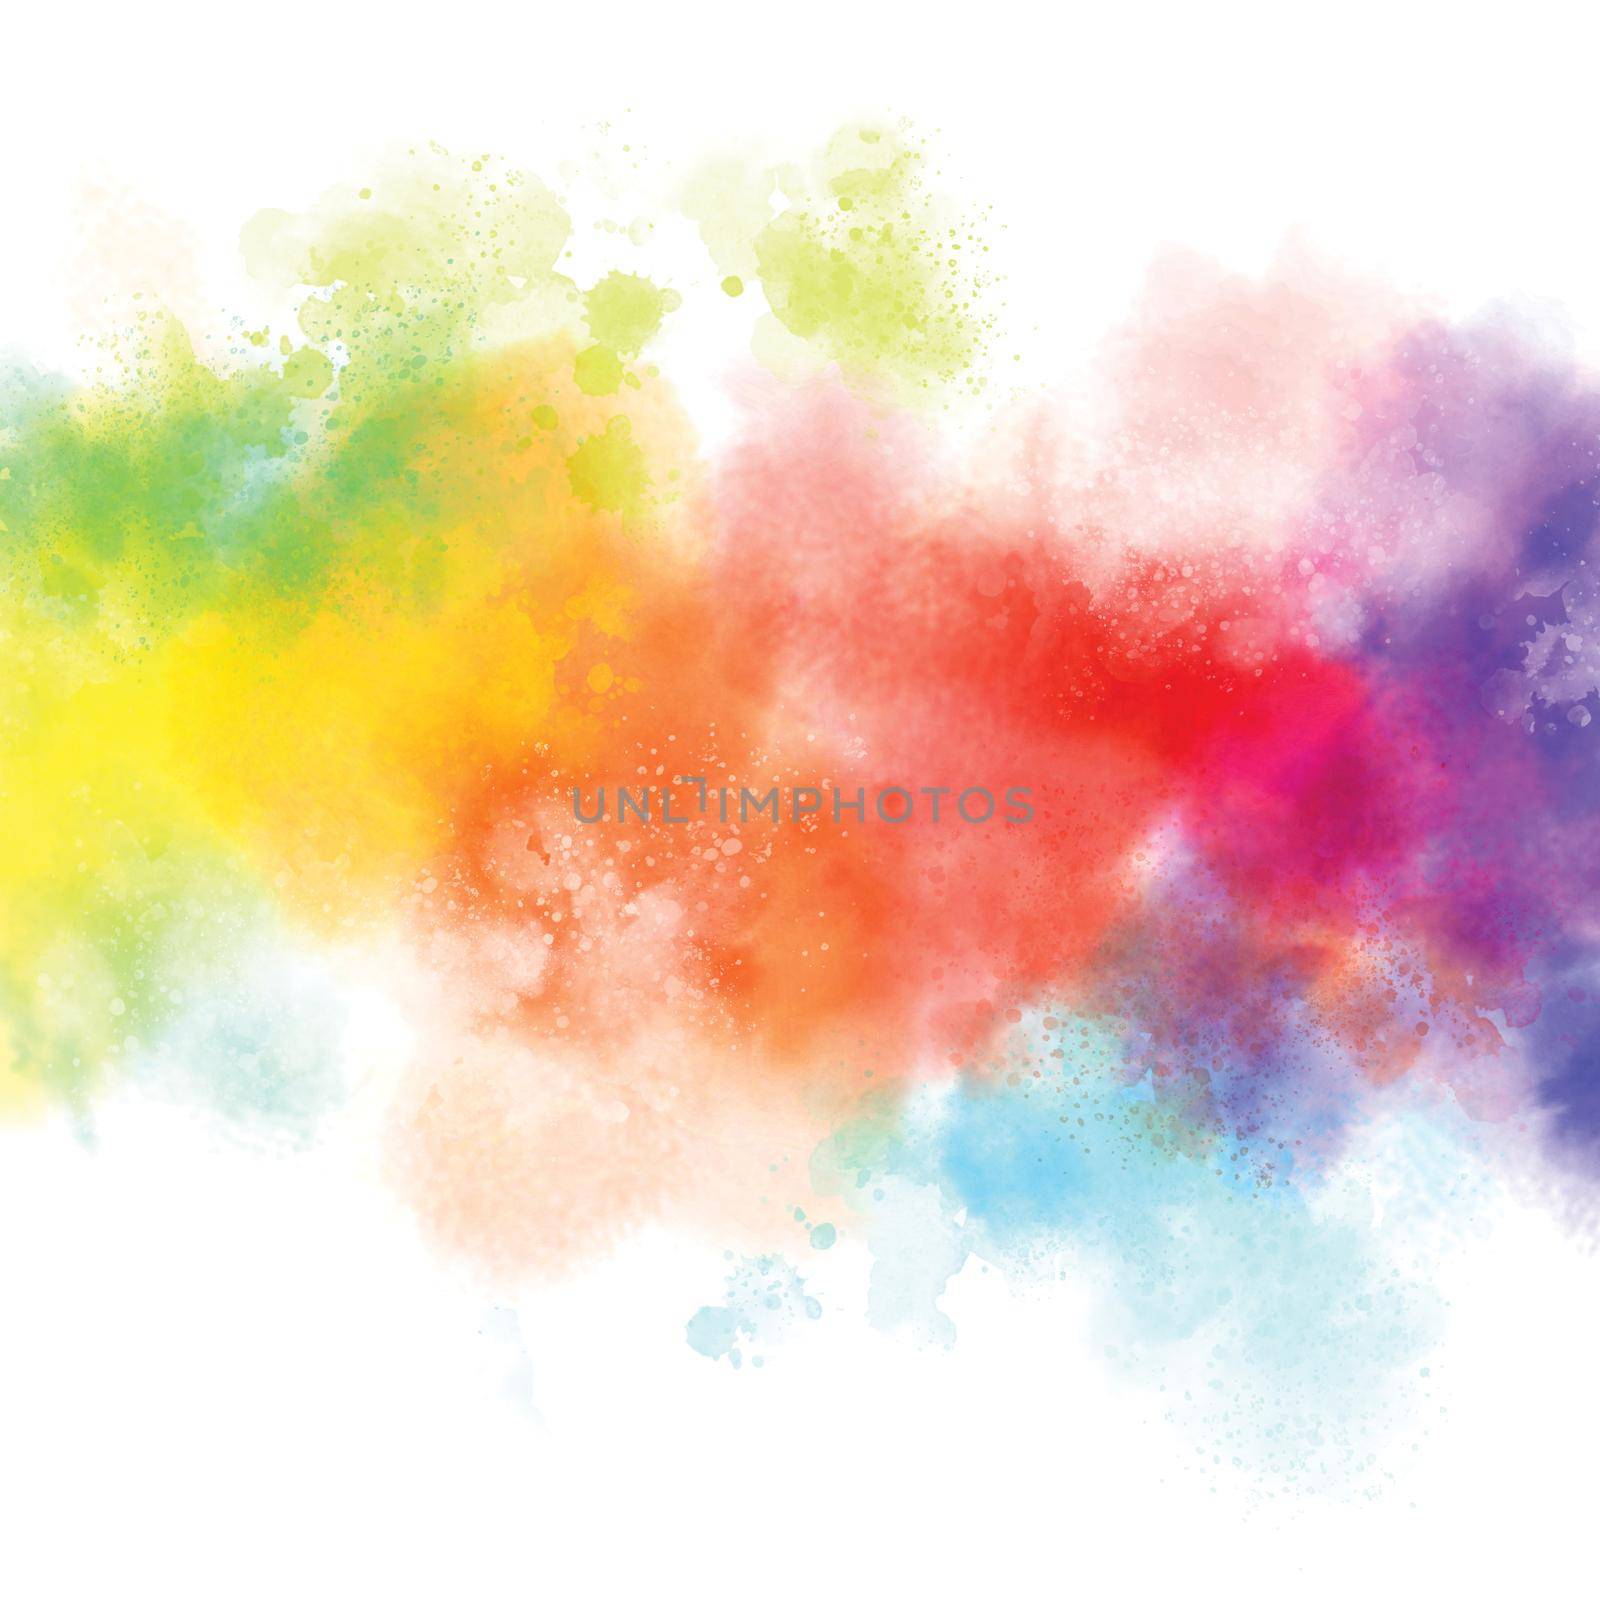 Cllorful watercolor on white background illustration by Myimagine